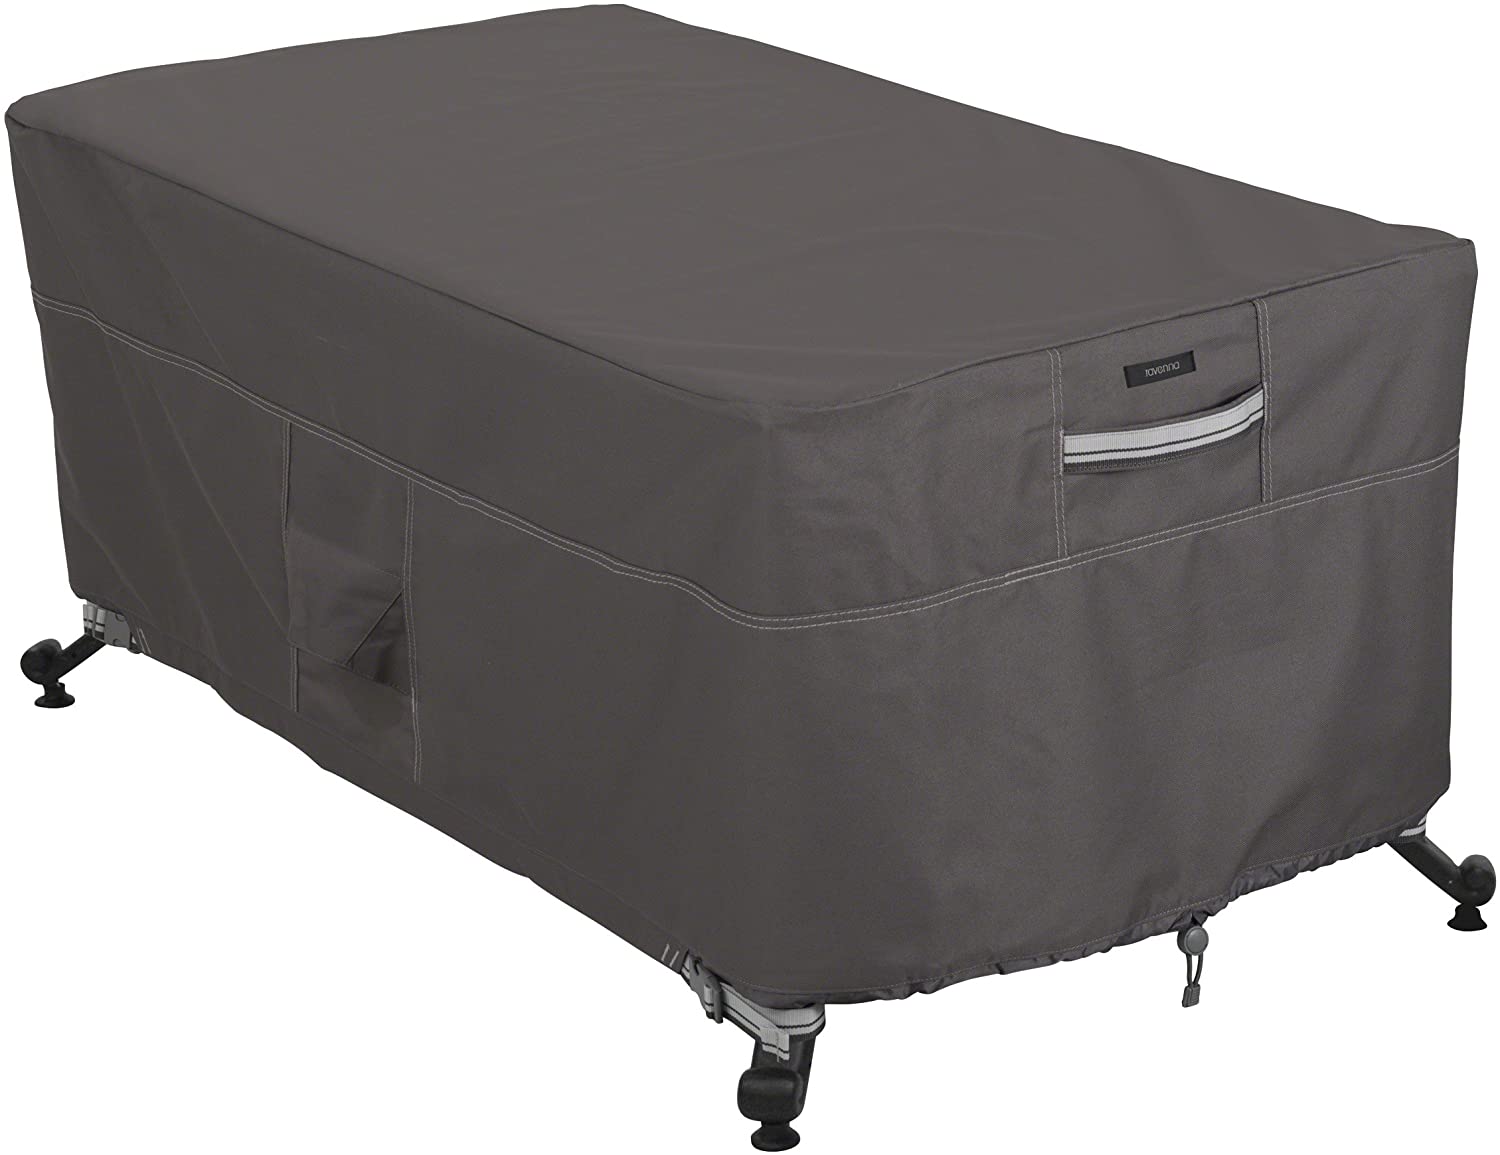 Classic Accessories Ravenna Fire Pit Table Cover